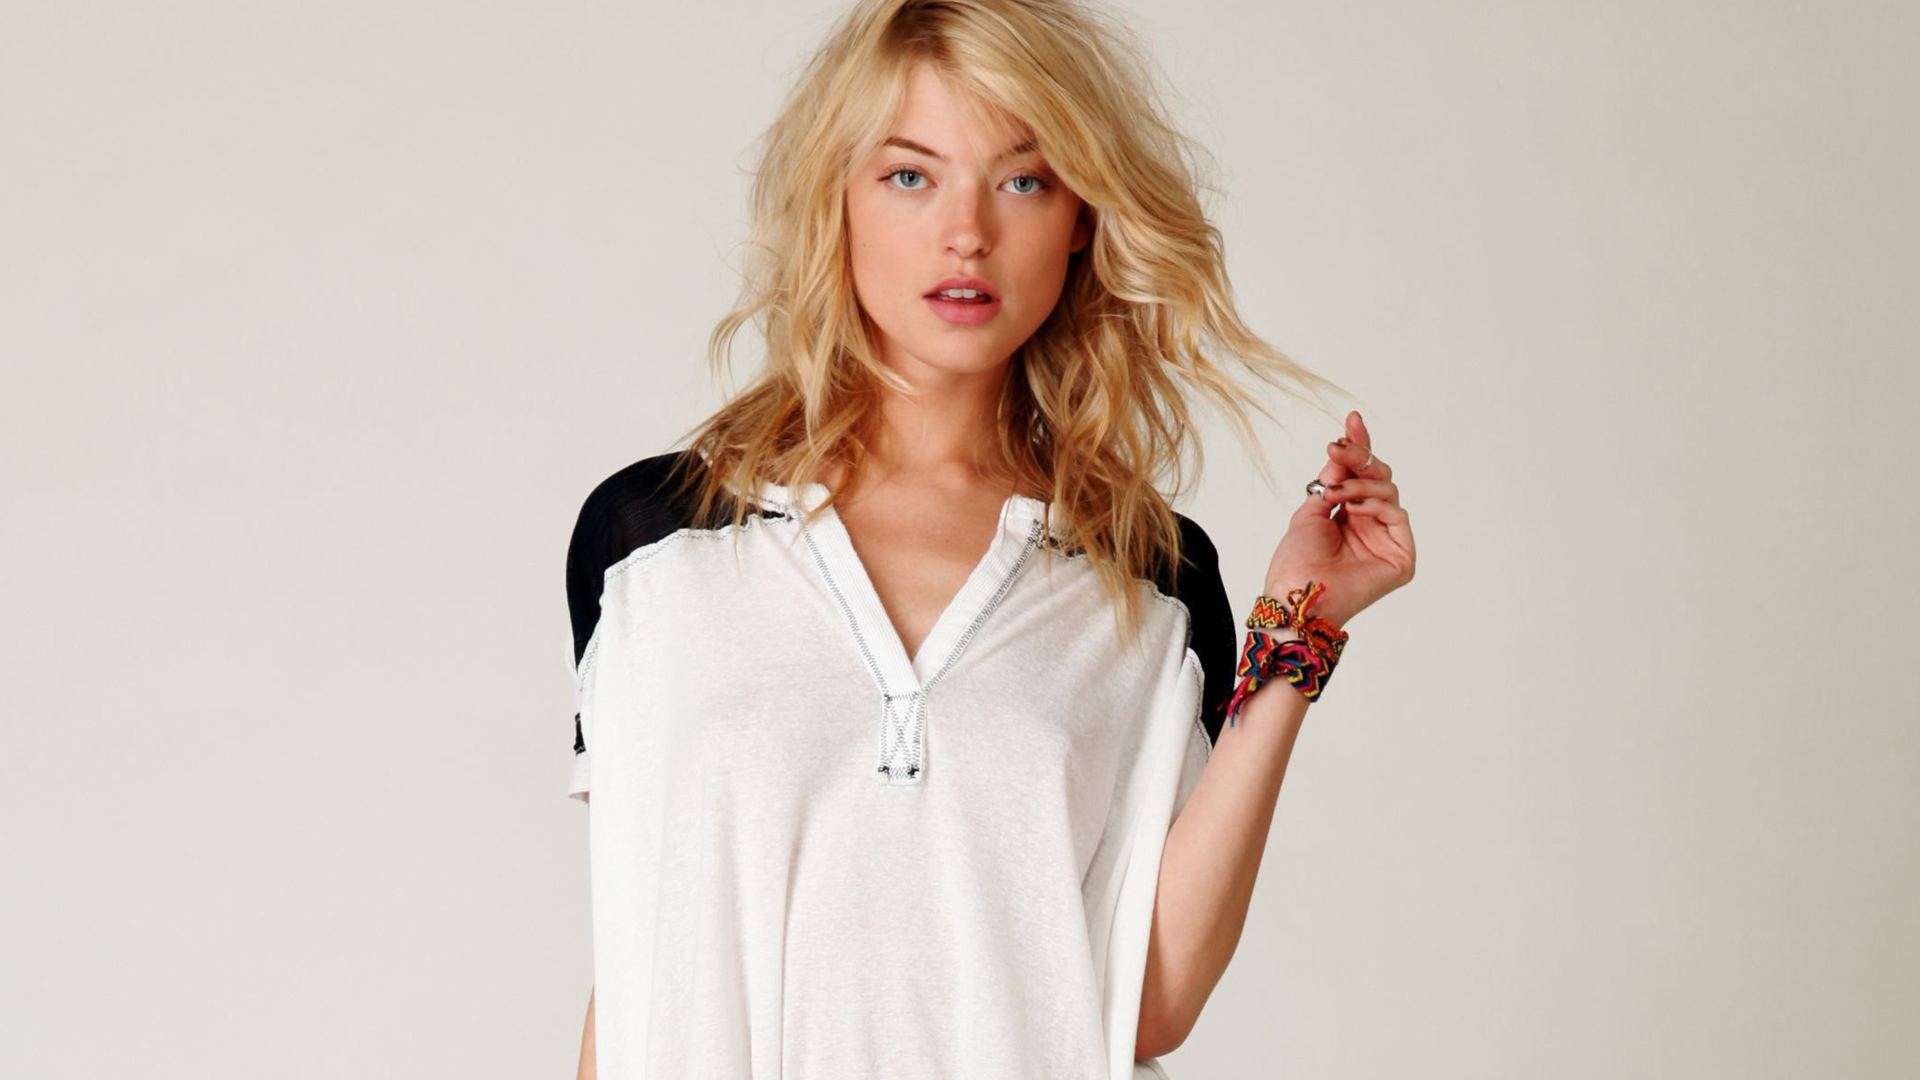 Model Martha Hunt in a t-shirt on a gray background